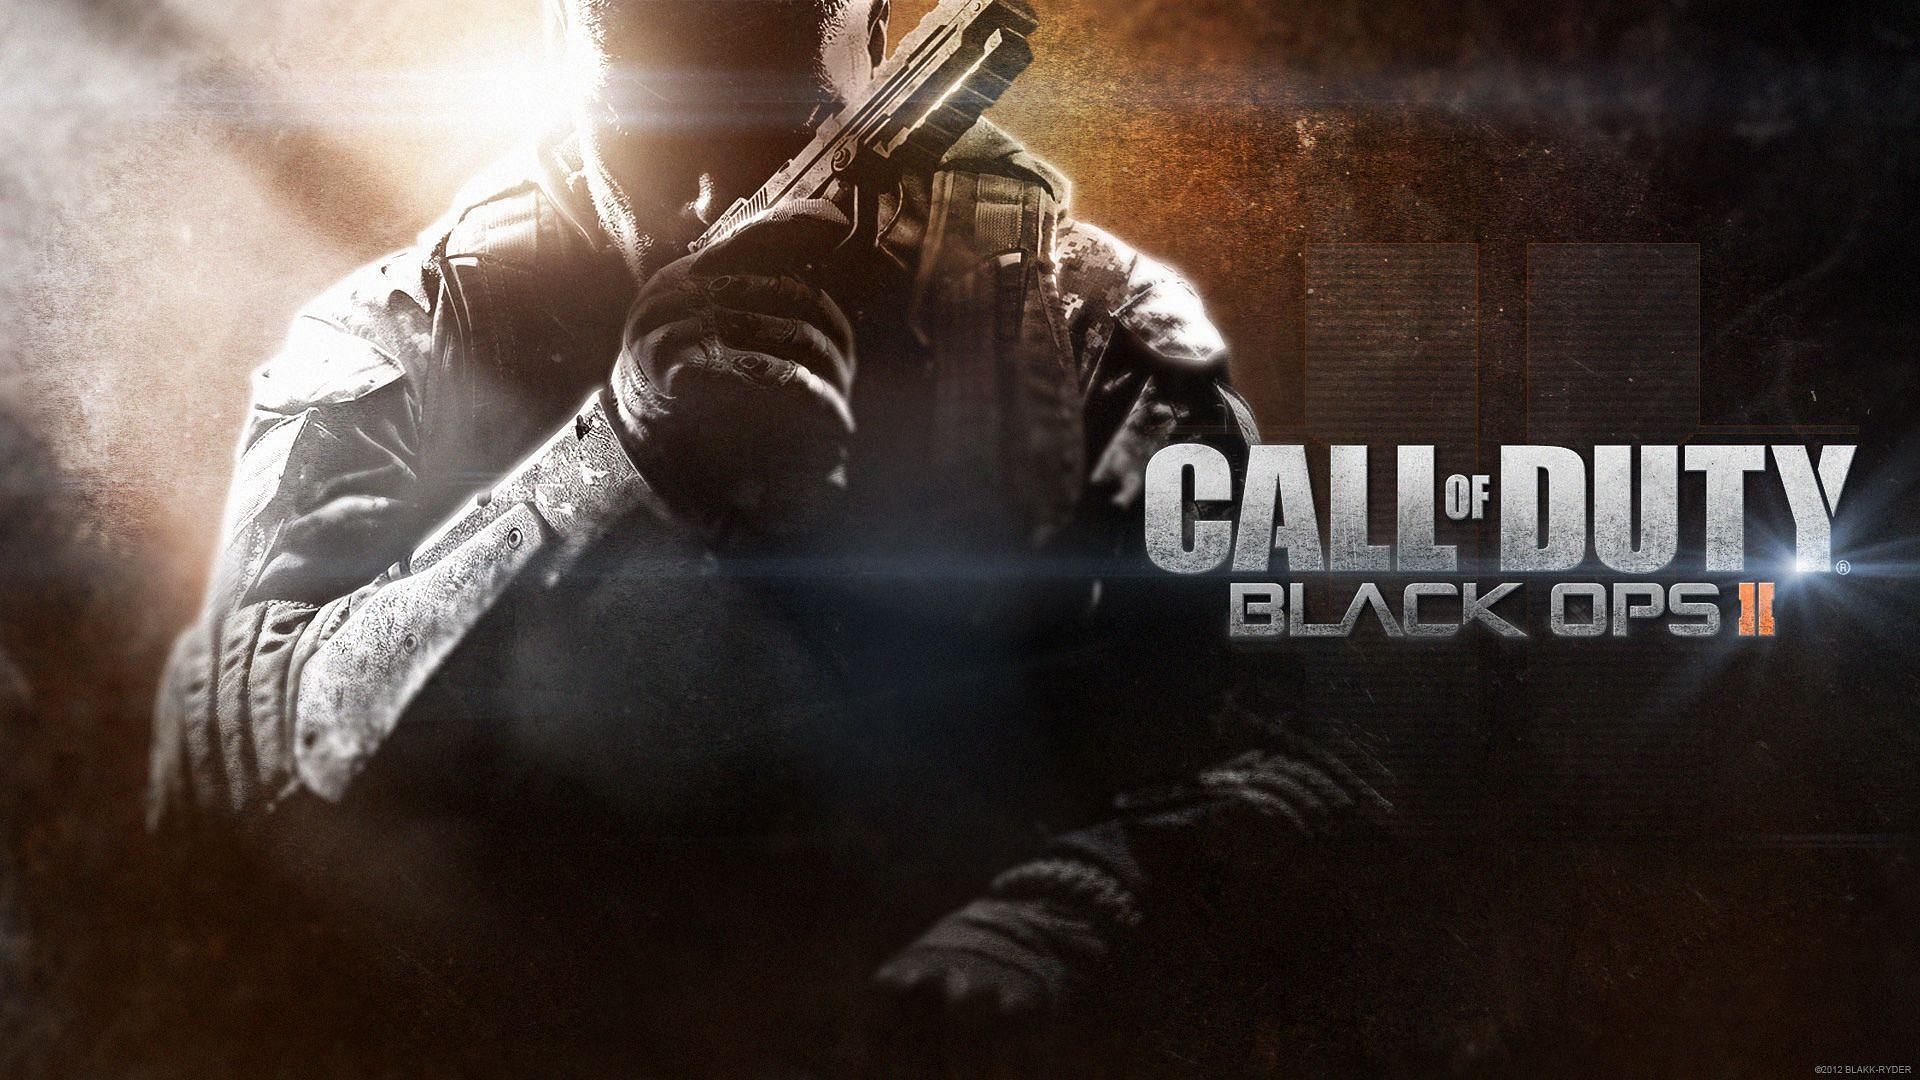 Call of Duty Black Ops II fans are preparing for a revival event (Image via Wallpaper Cave)